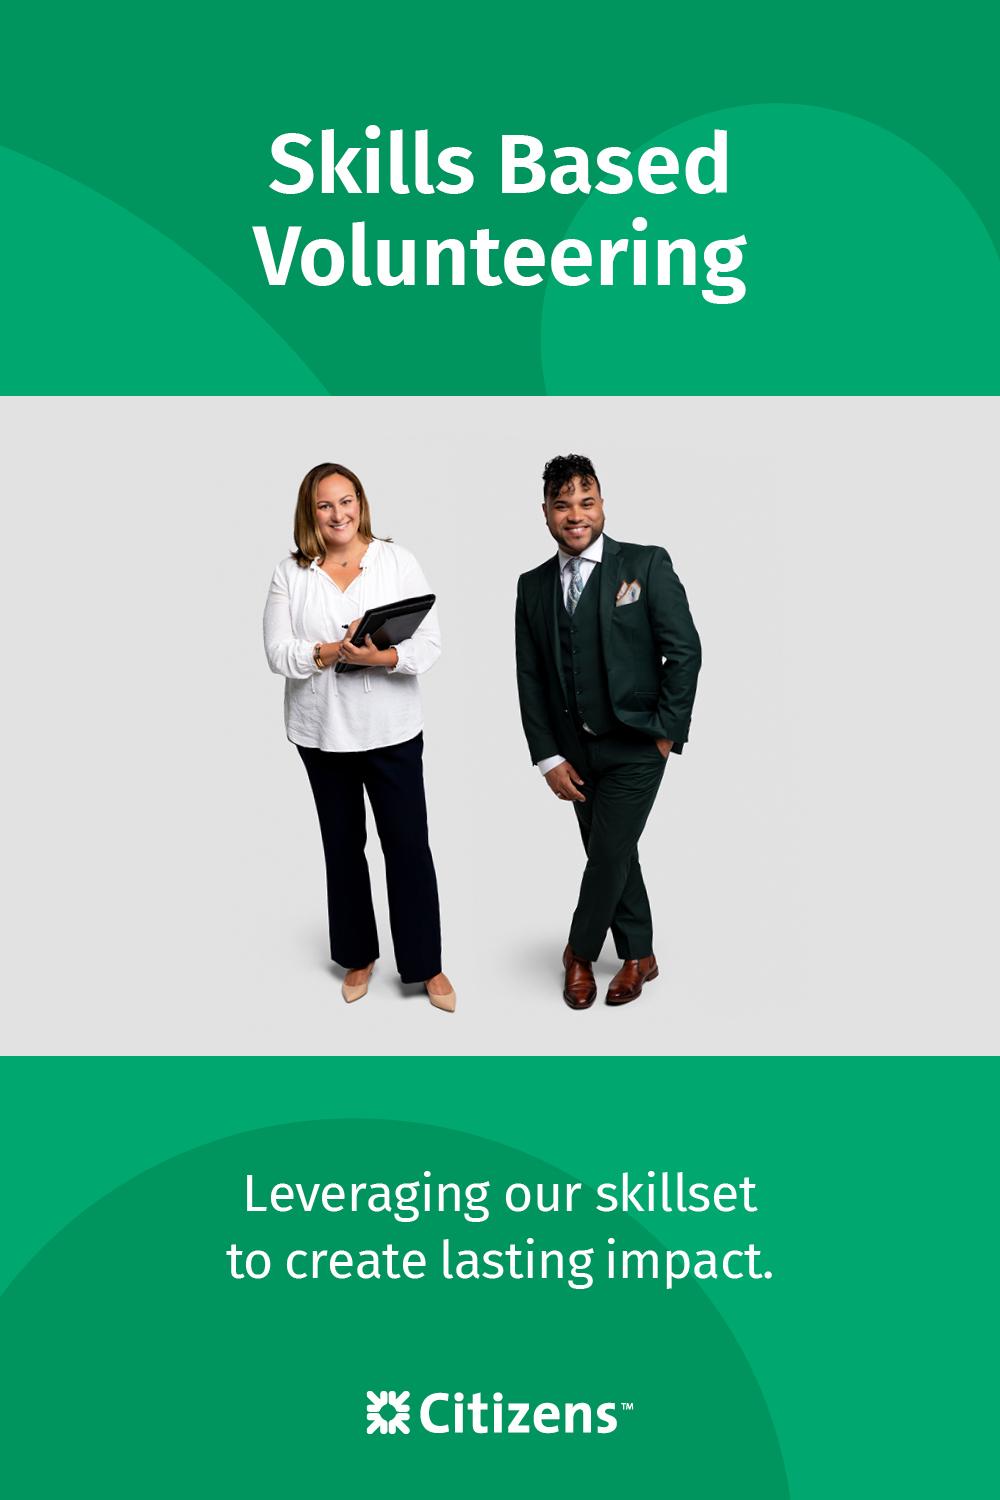 Skills-Based Volunteering with Citizens and Common Impact